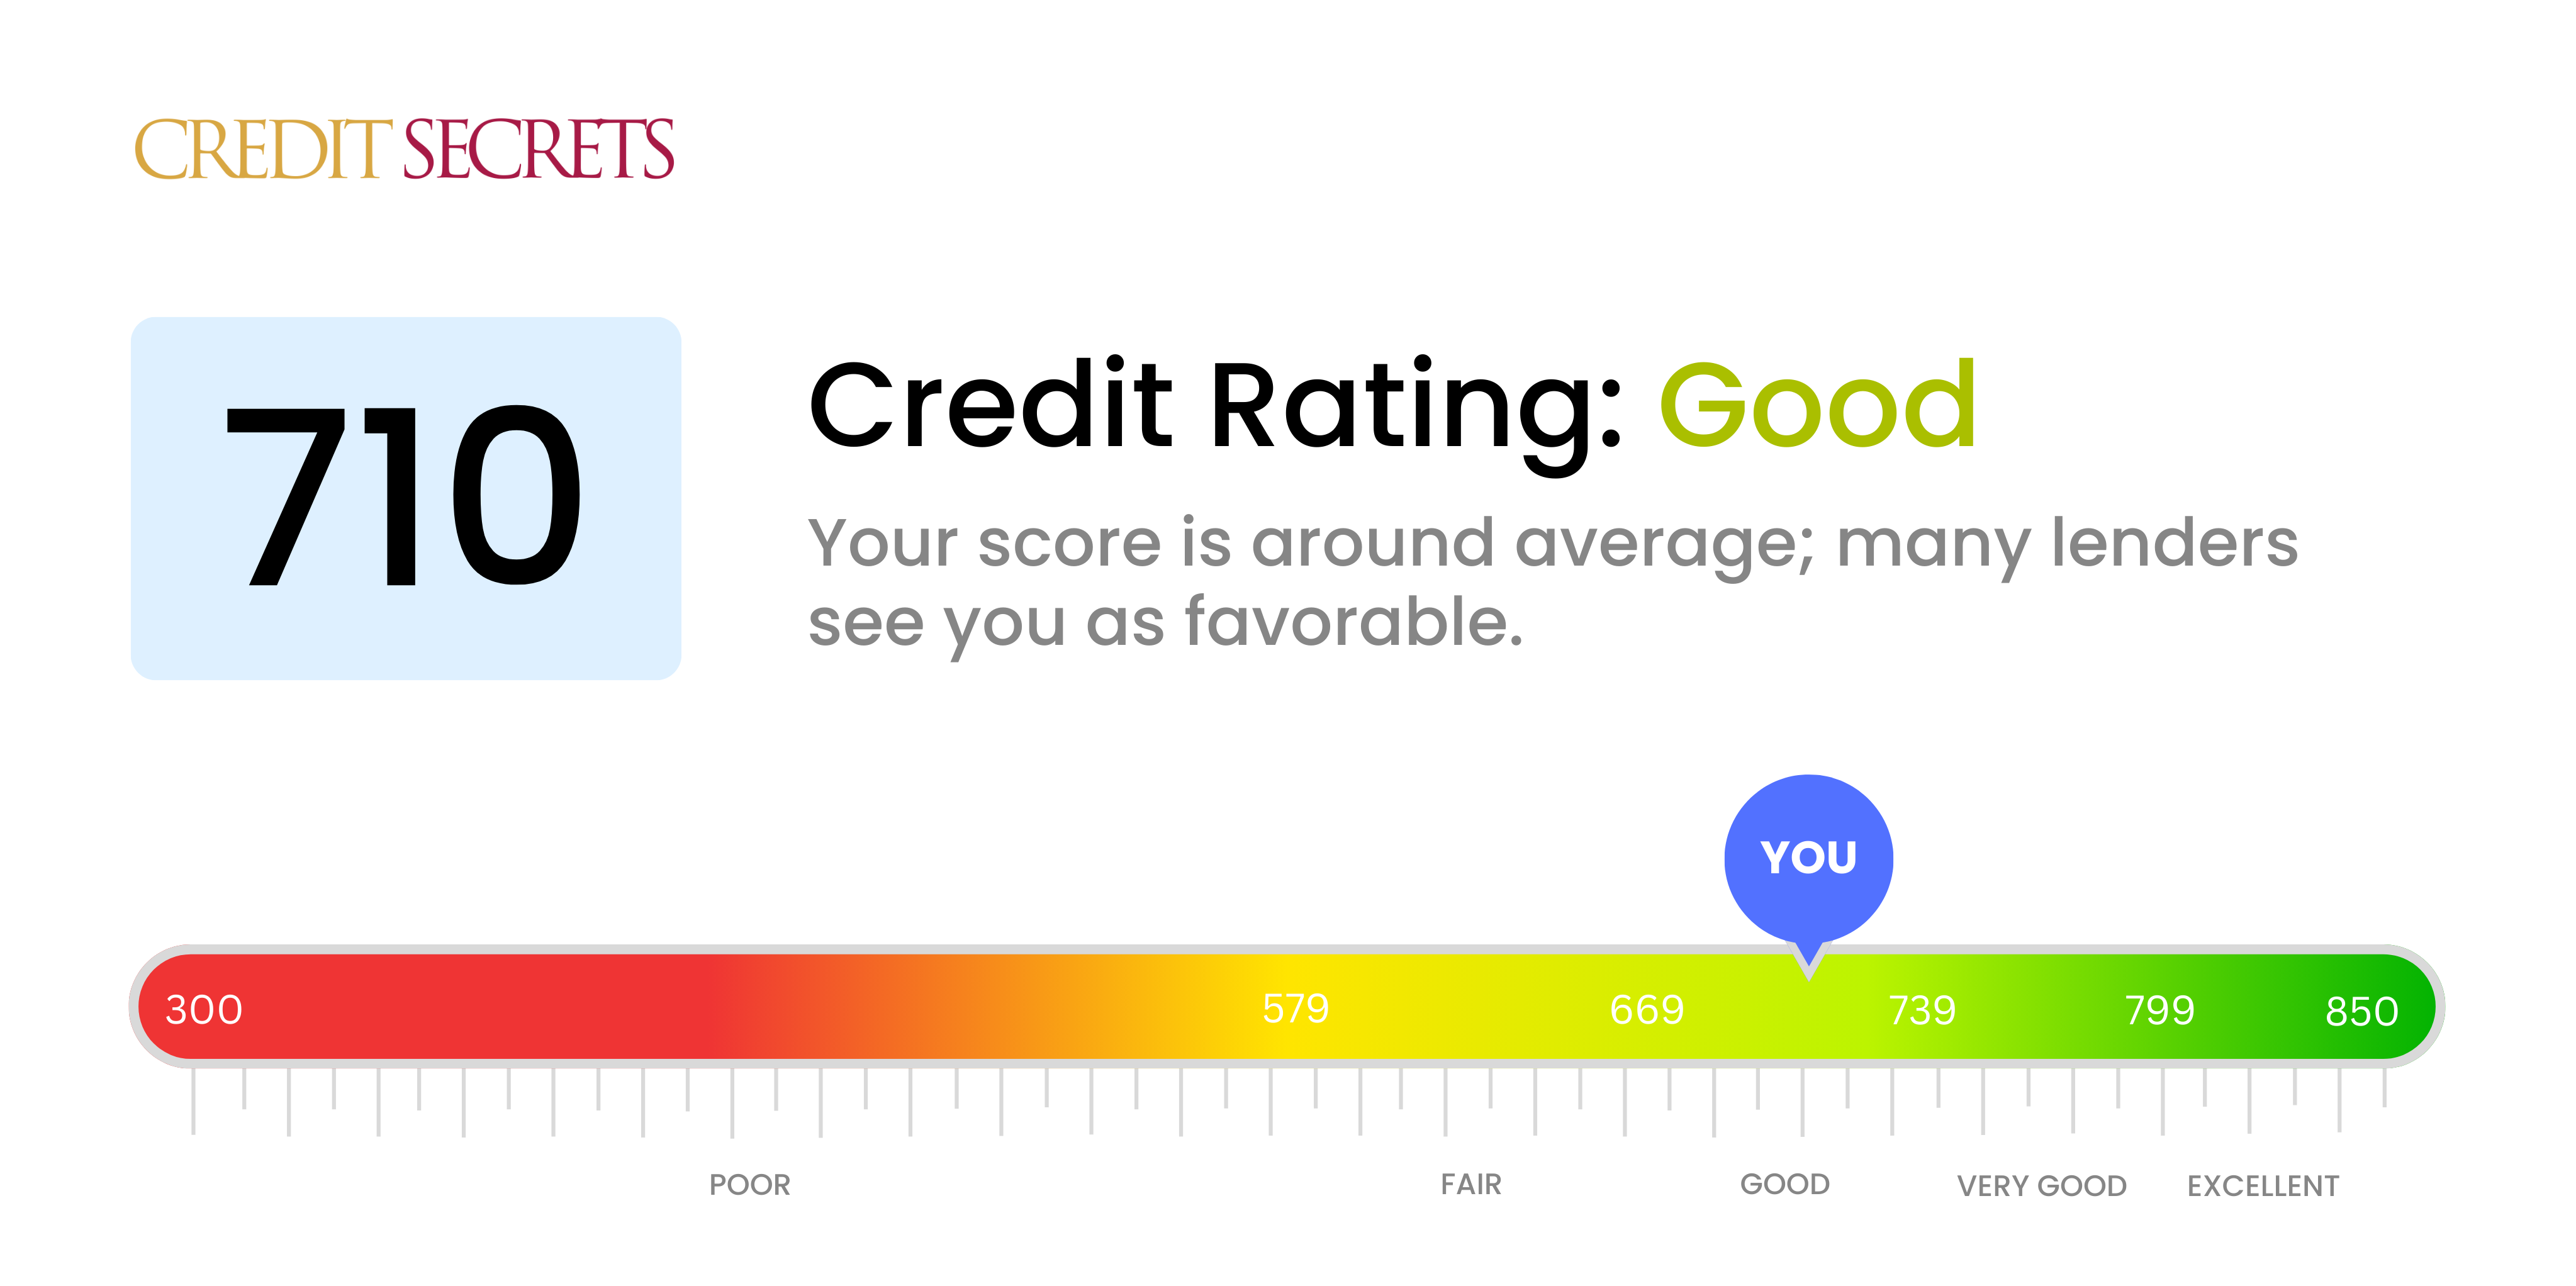 Is 710 a good credit score?